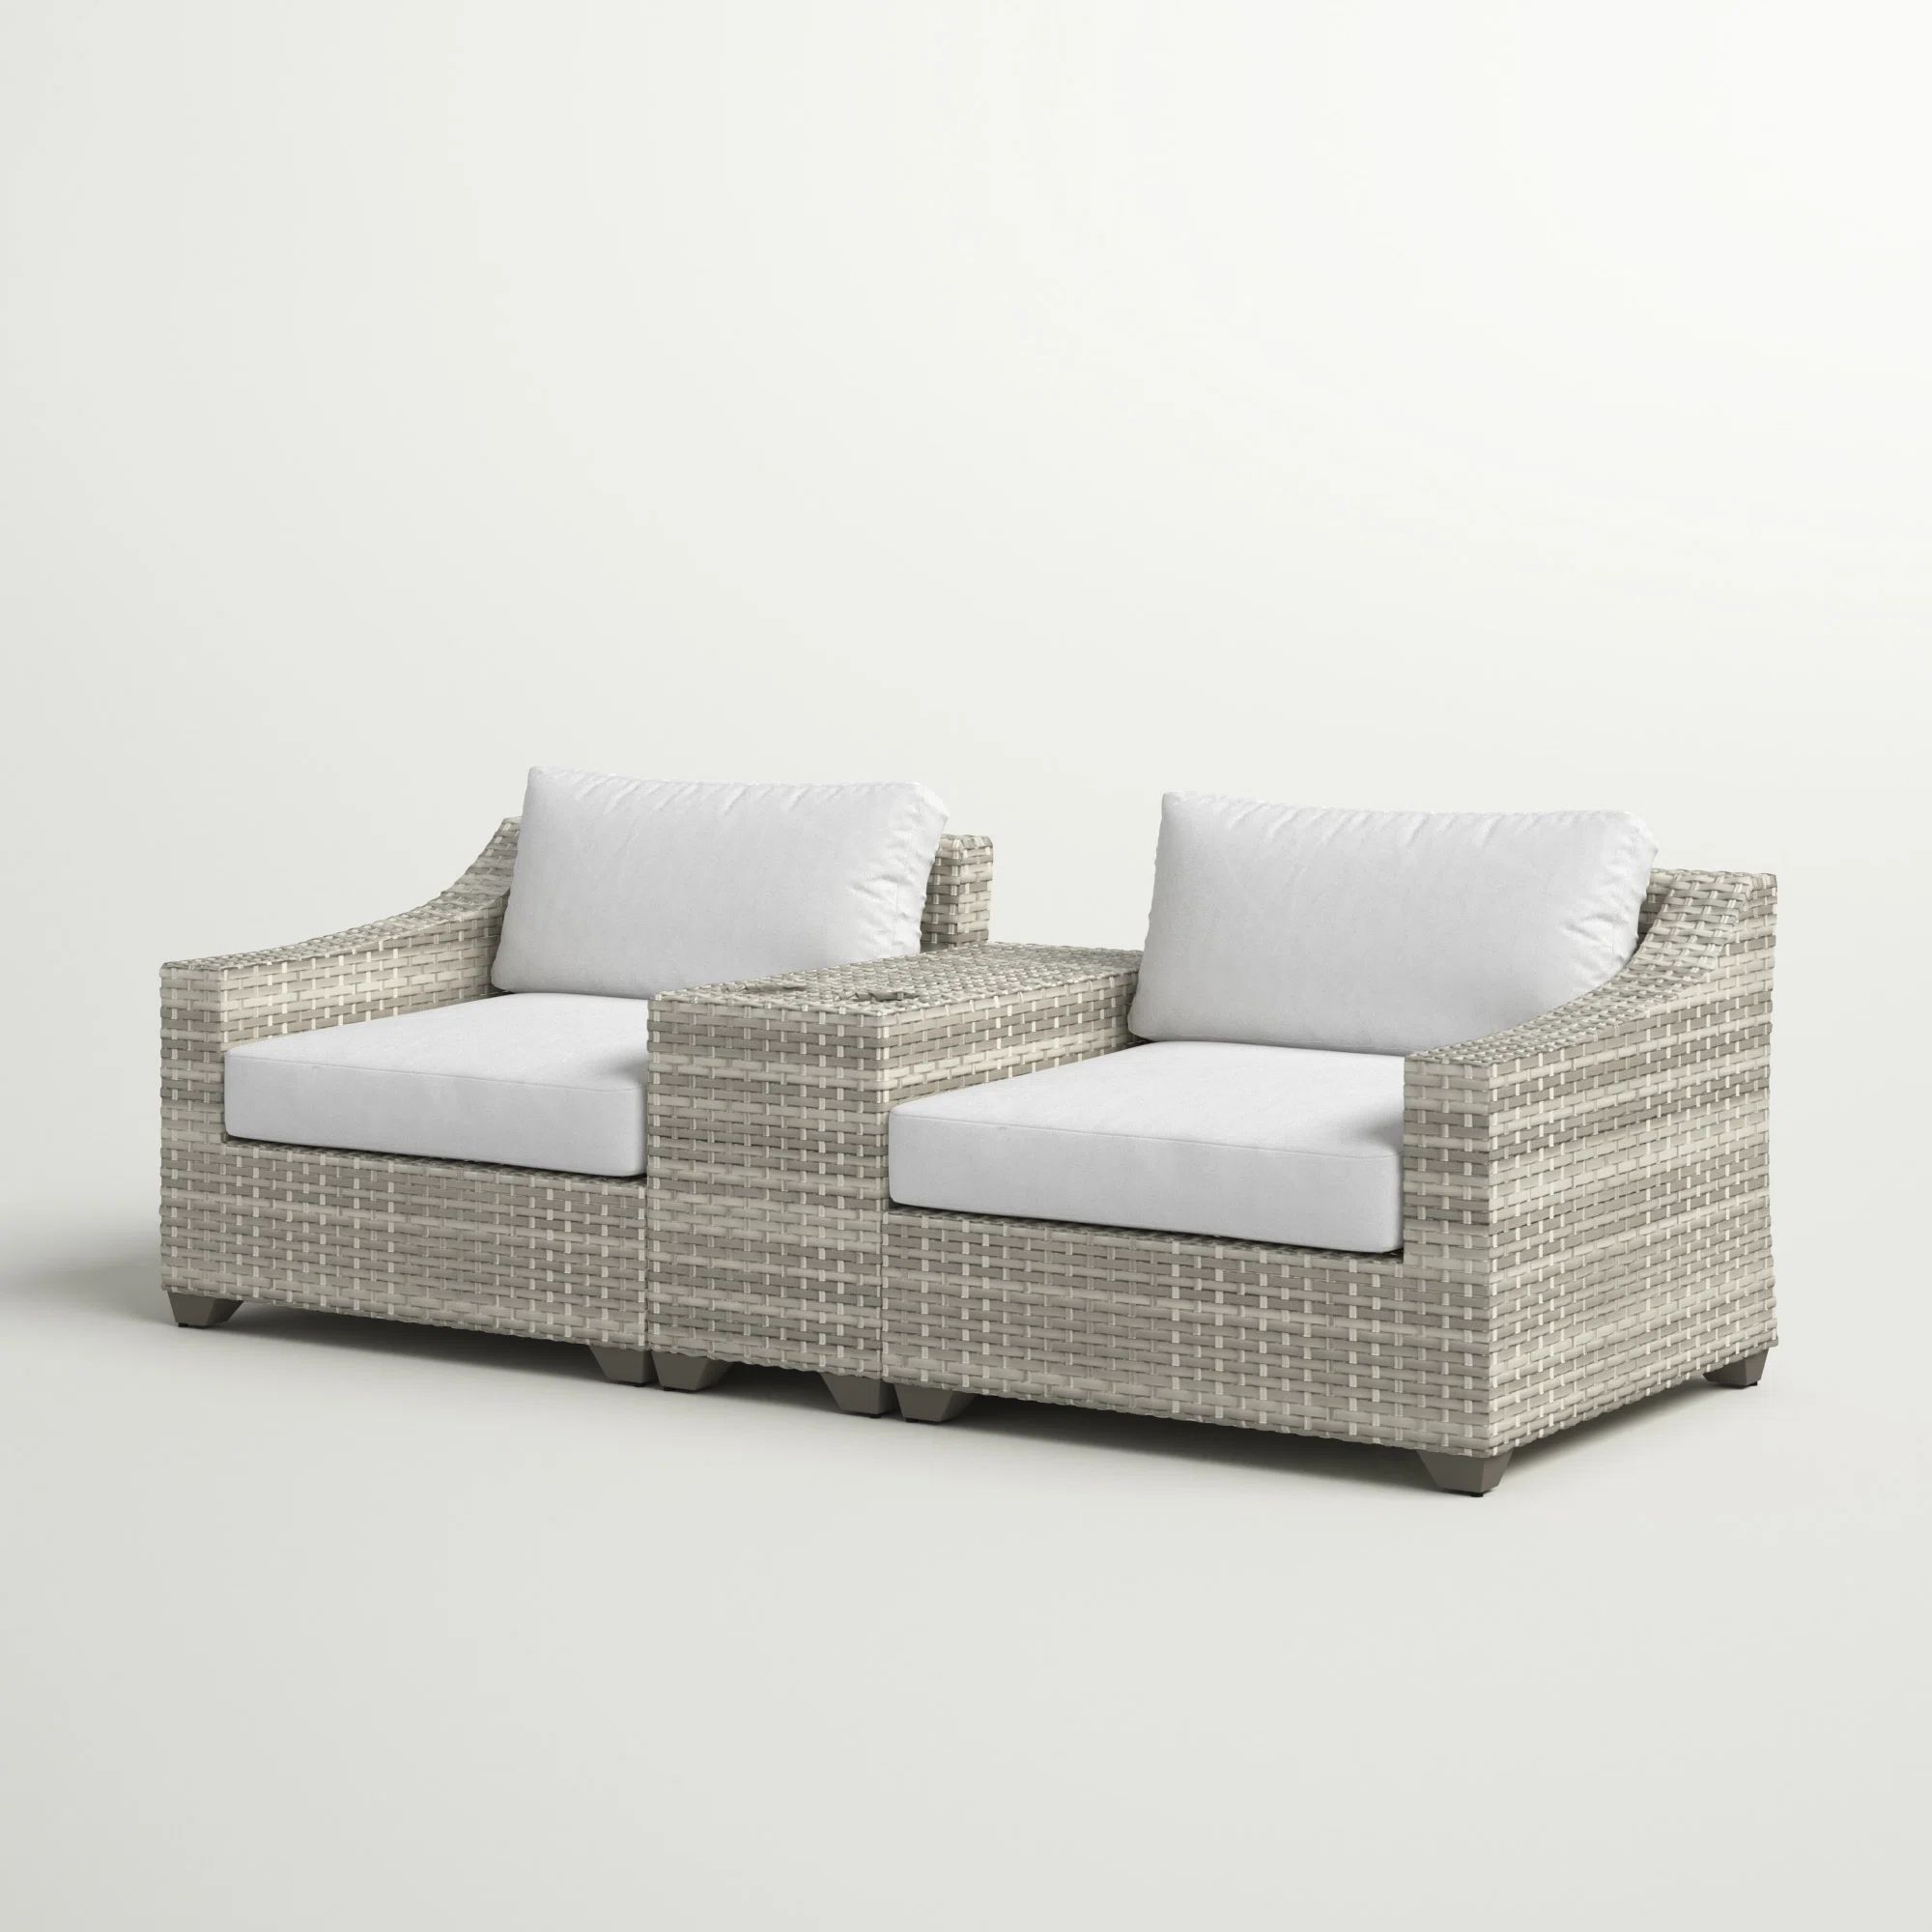 Falmouth High-Density Polyethylene (HDPE) Wicker 2 - Person Seating Group with Cushions | Wayfair North America